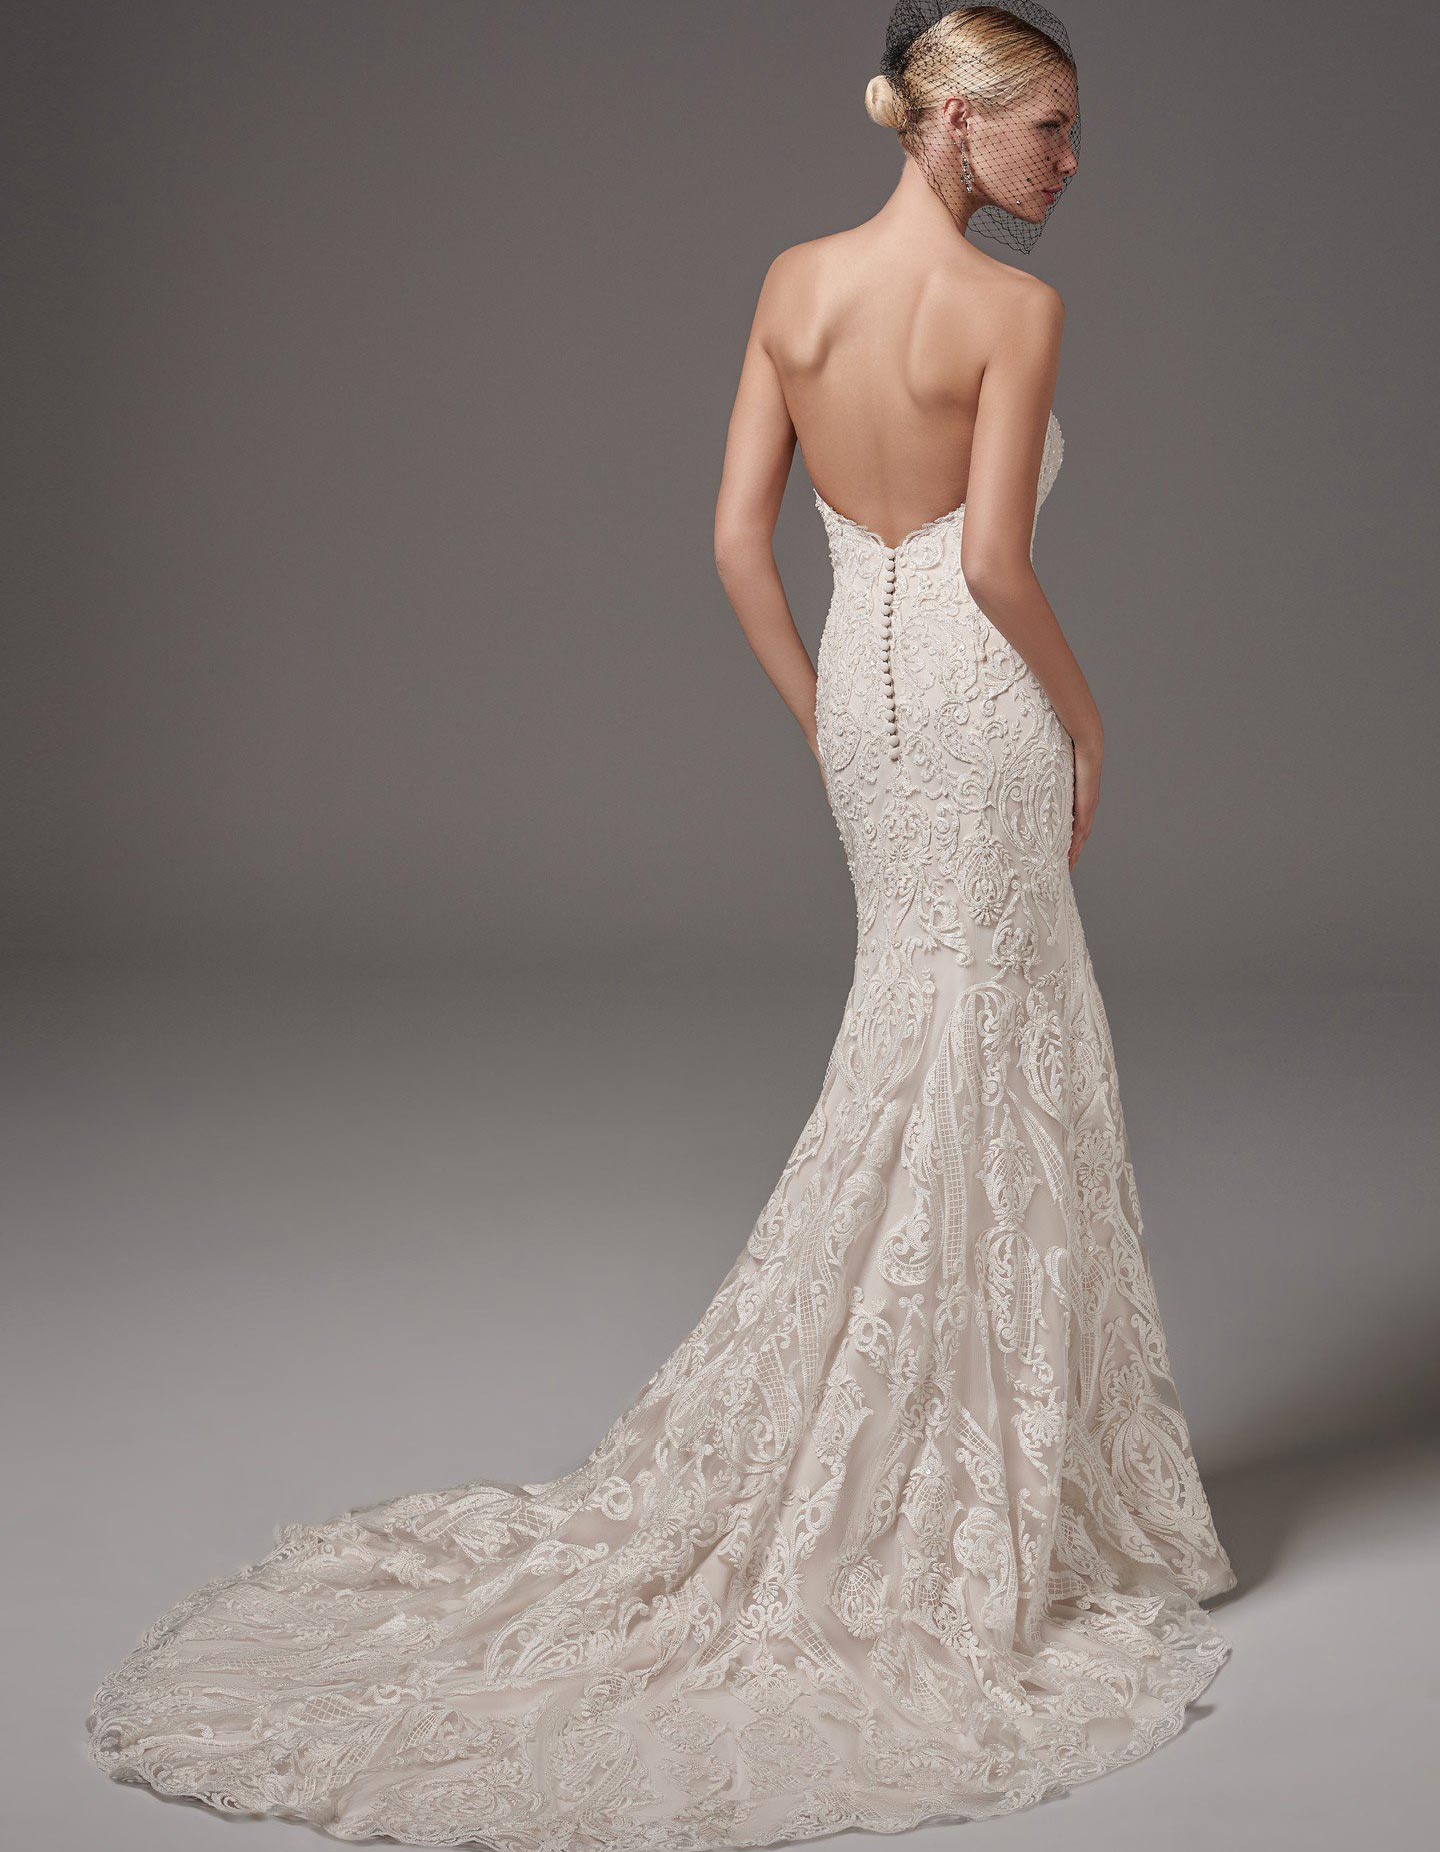 Sottero and Midgley Hadley lace wedding dress with sweetheart neckline